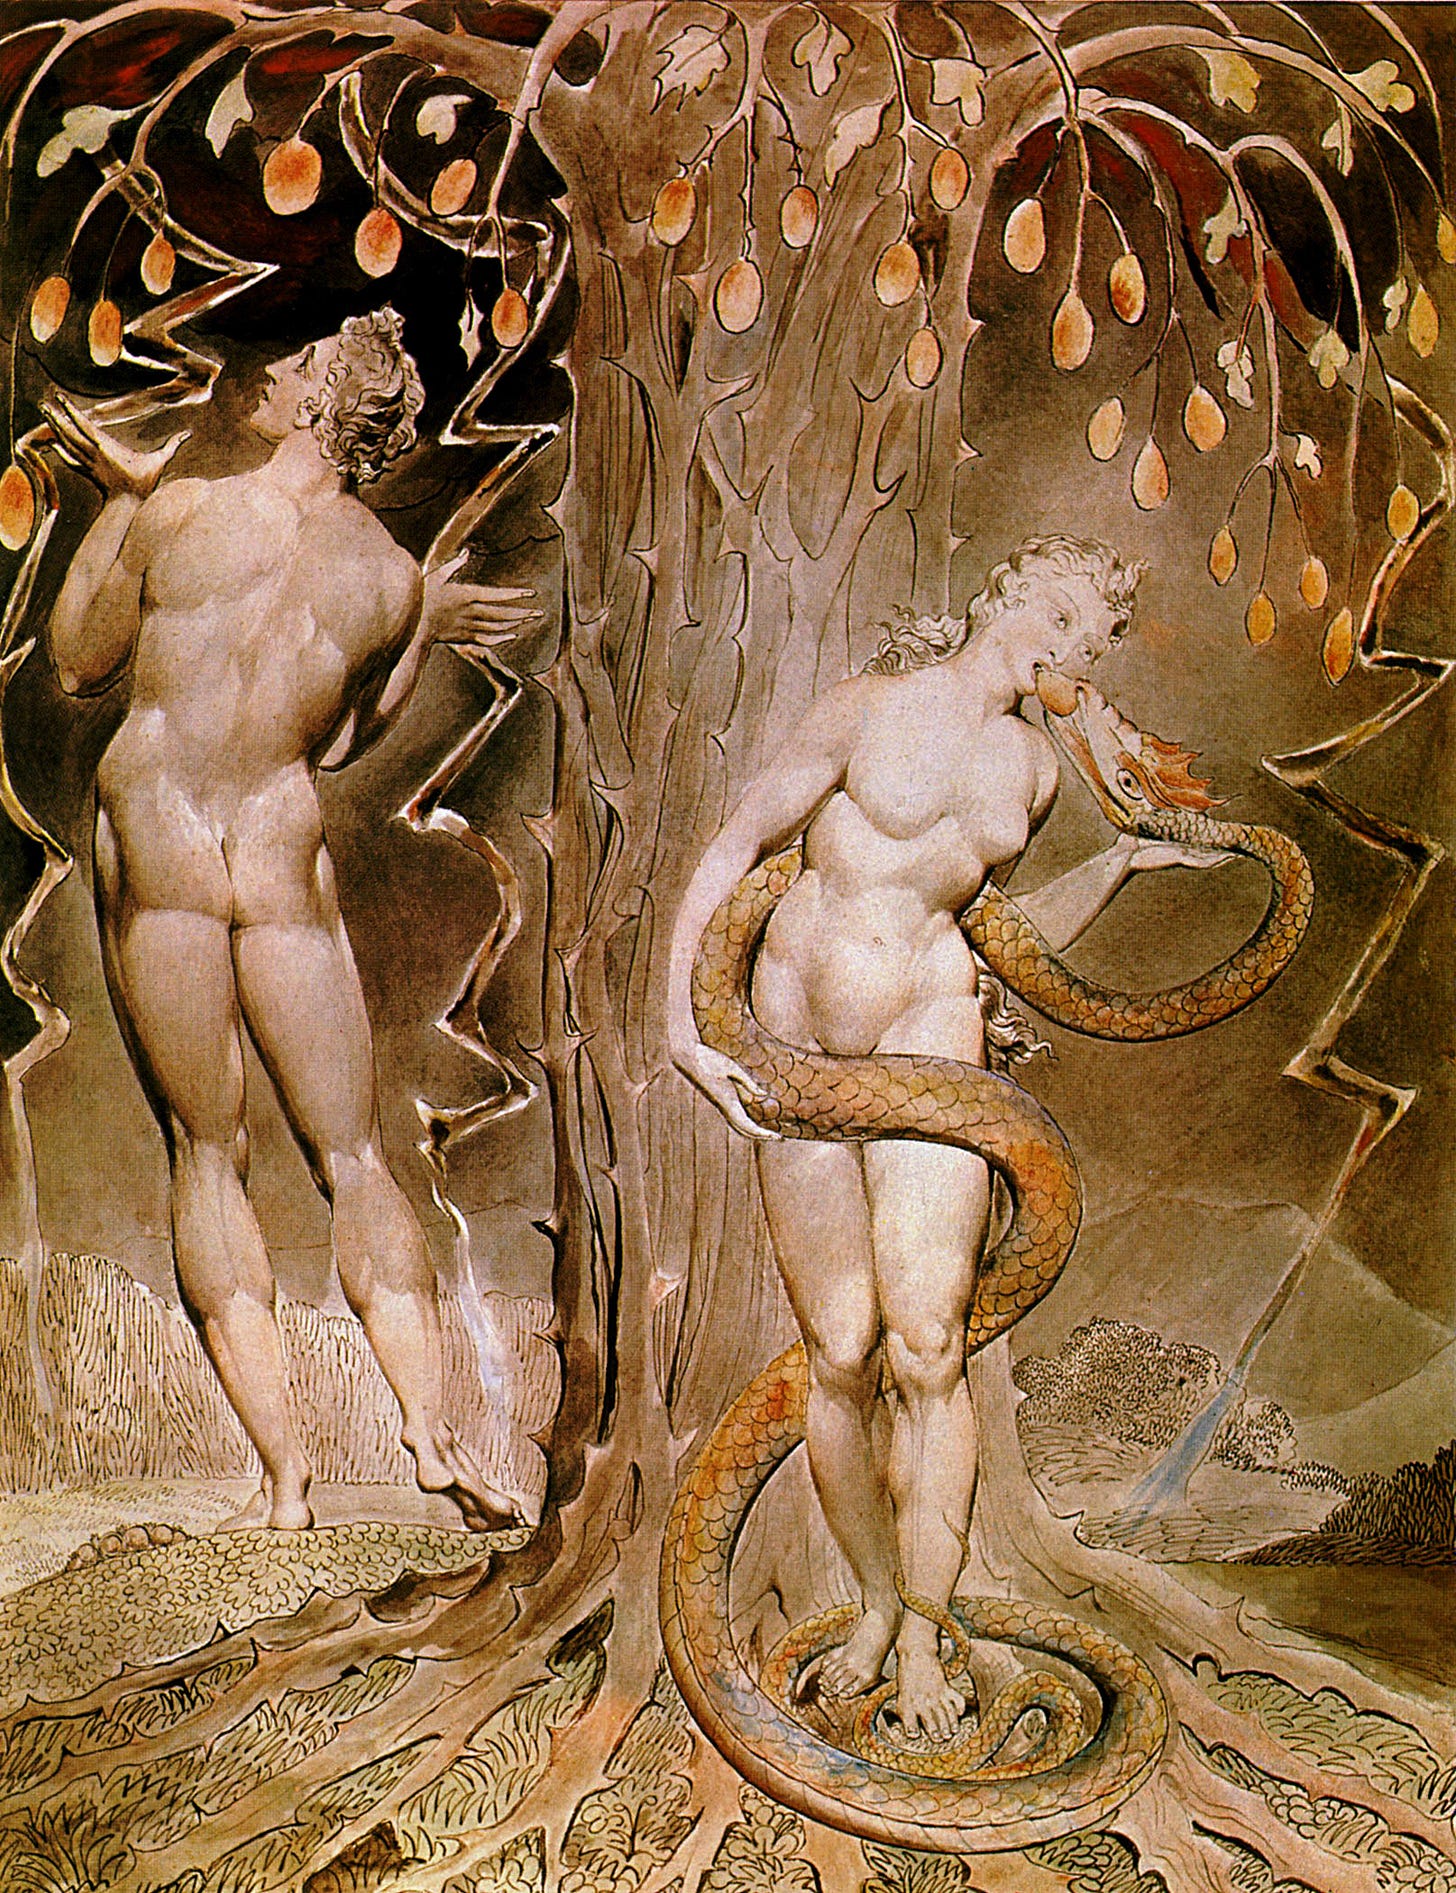 Painting of Adam and Eve by the tree of knowledge, standing naked, as the serpent places an apple in Eve's mouth.